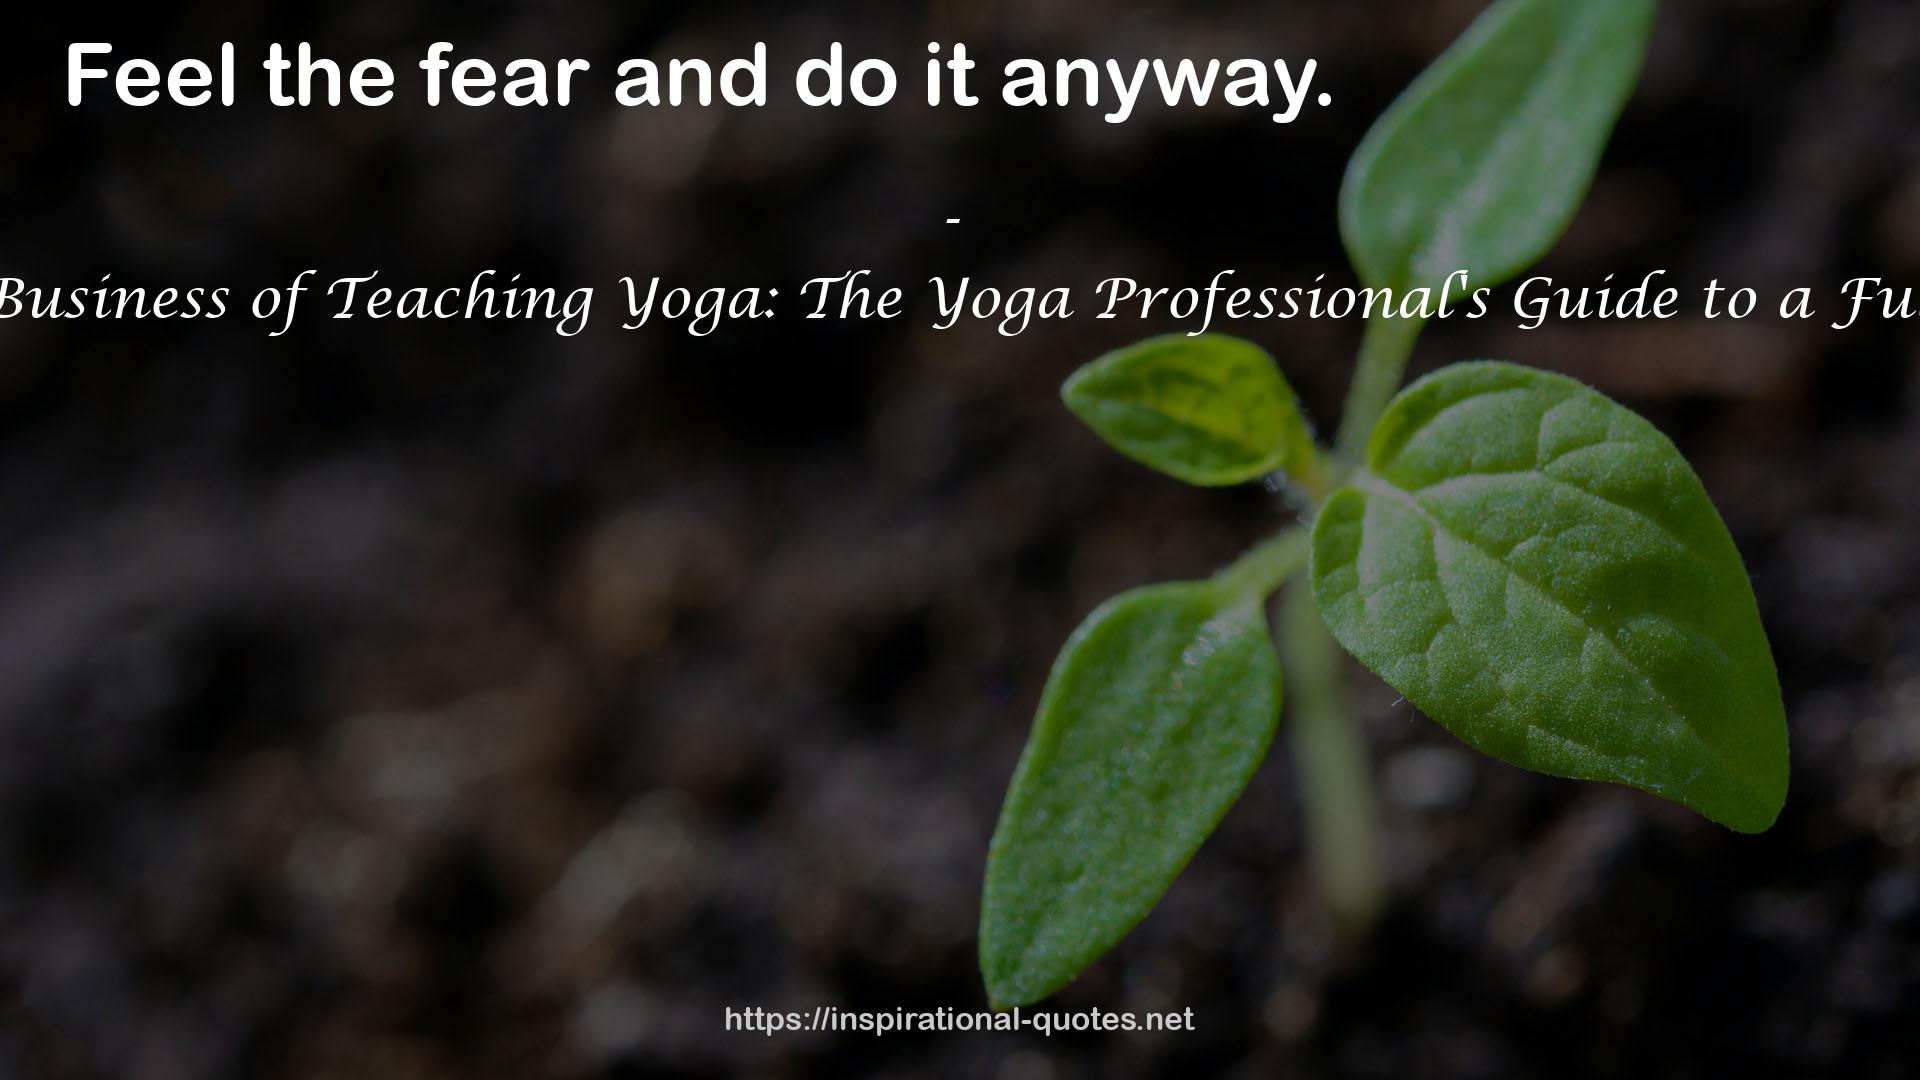 The Art and Business of Teaching Yoga: The Yoga Professional's Guide to a Fulfilling Career QUOTES